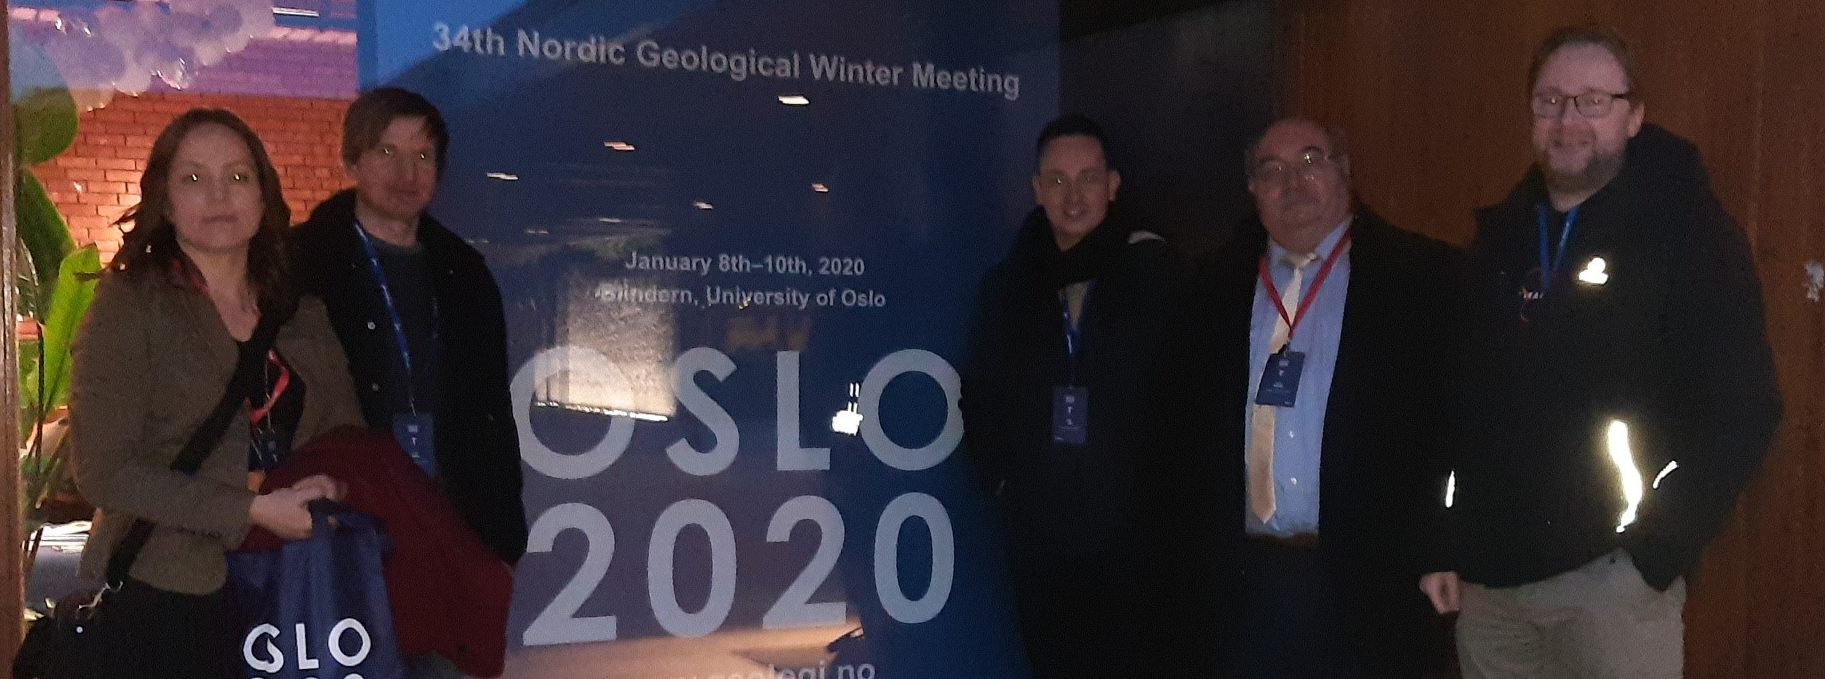 ENeRAG project participants at the Nordic Geological Winter Meeting